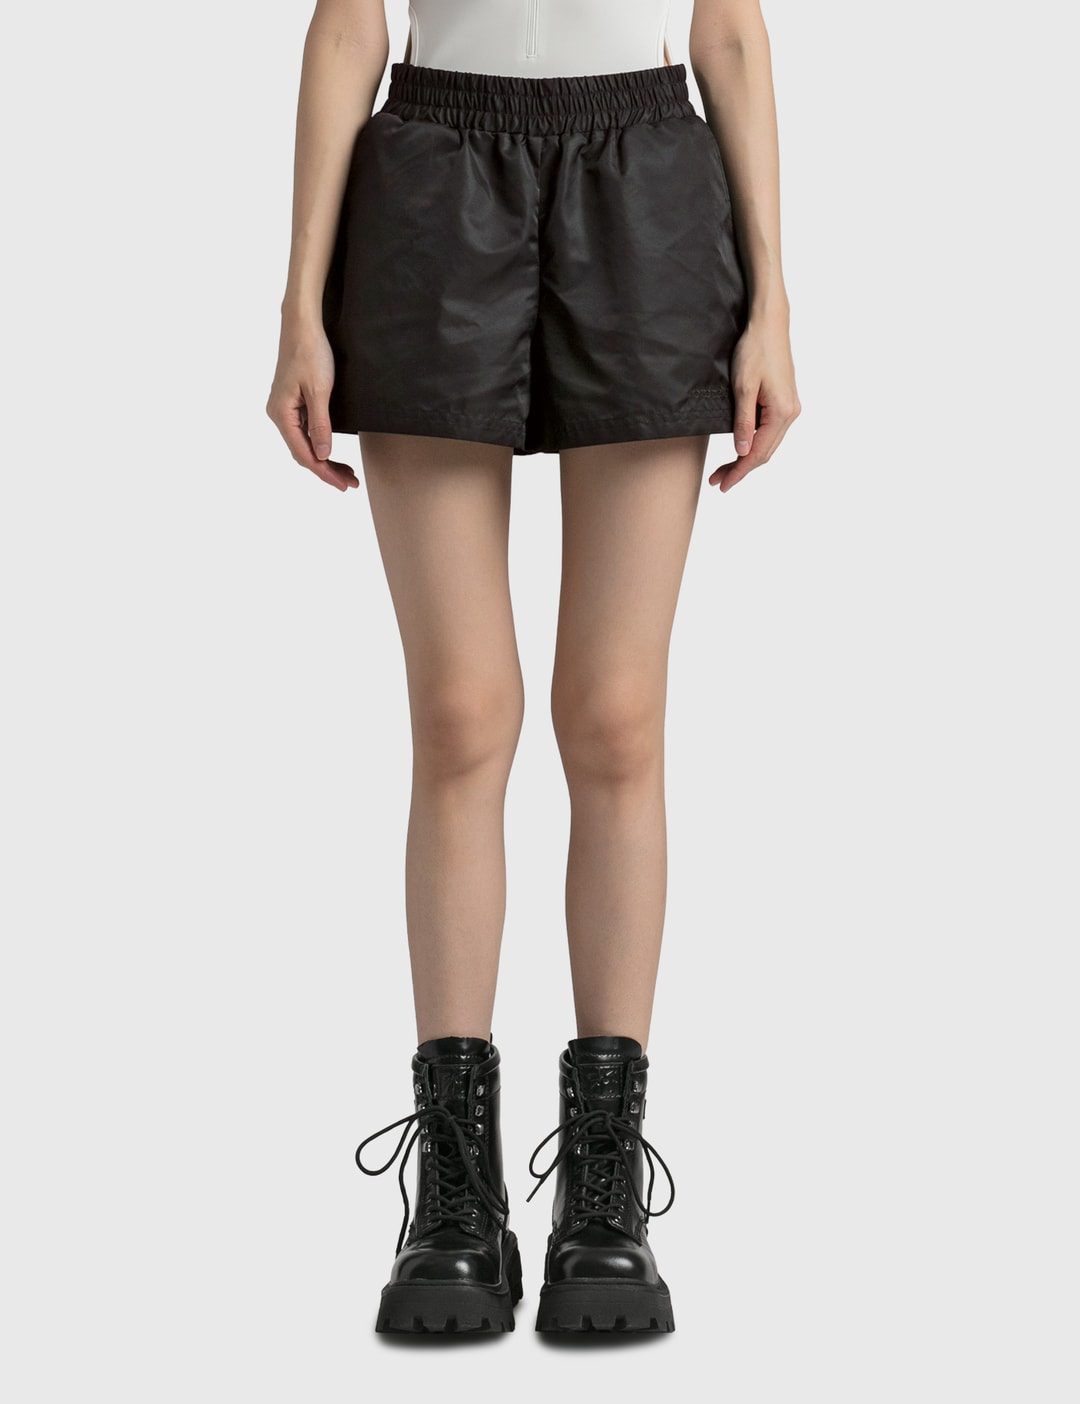 ROTATE Sunday - Roxanne Shorts | HBX - Globally Curated Fashion and ...